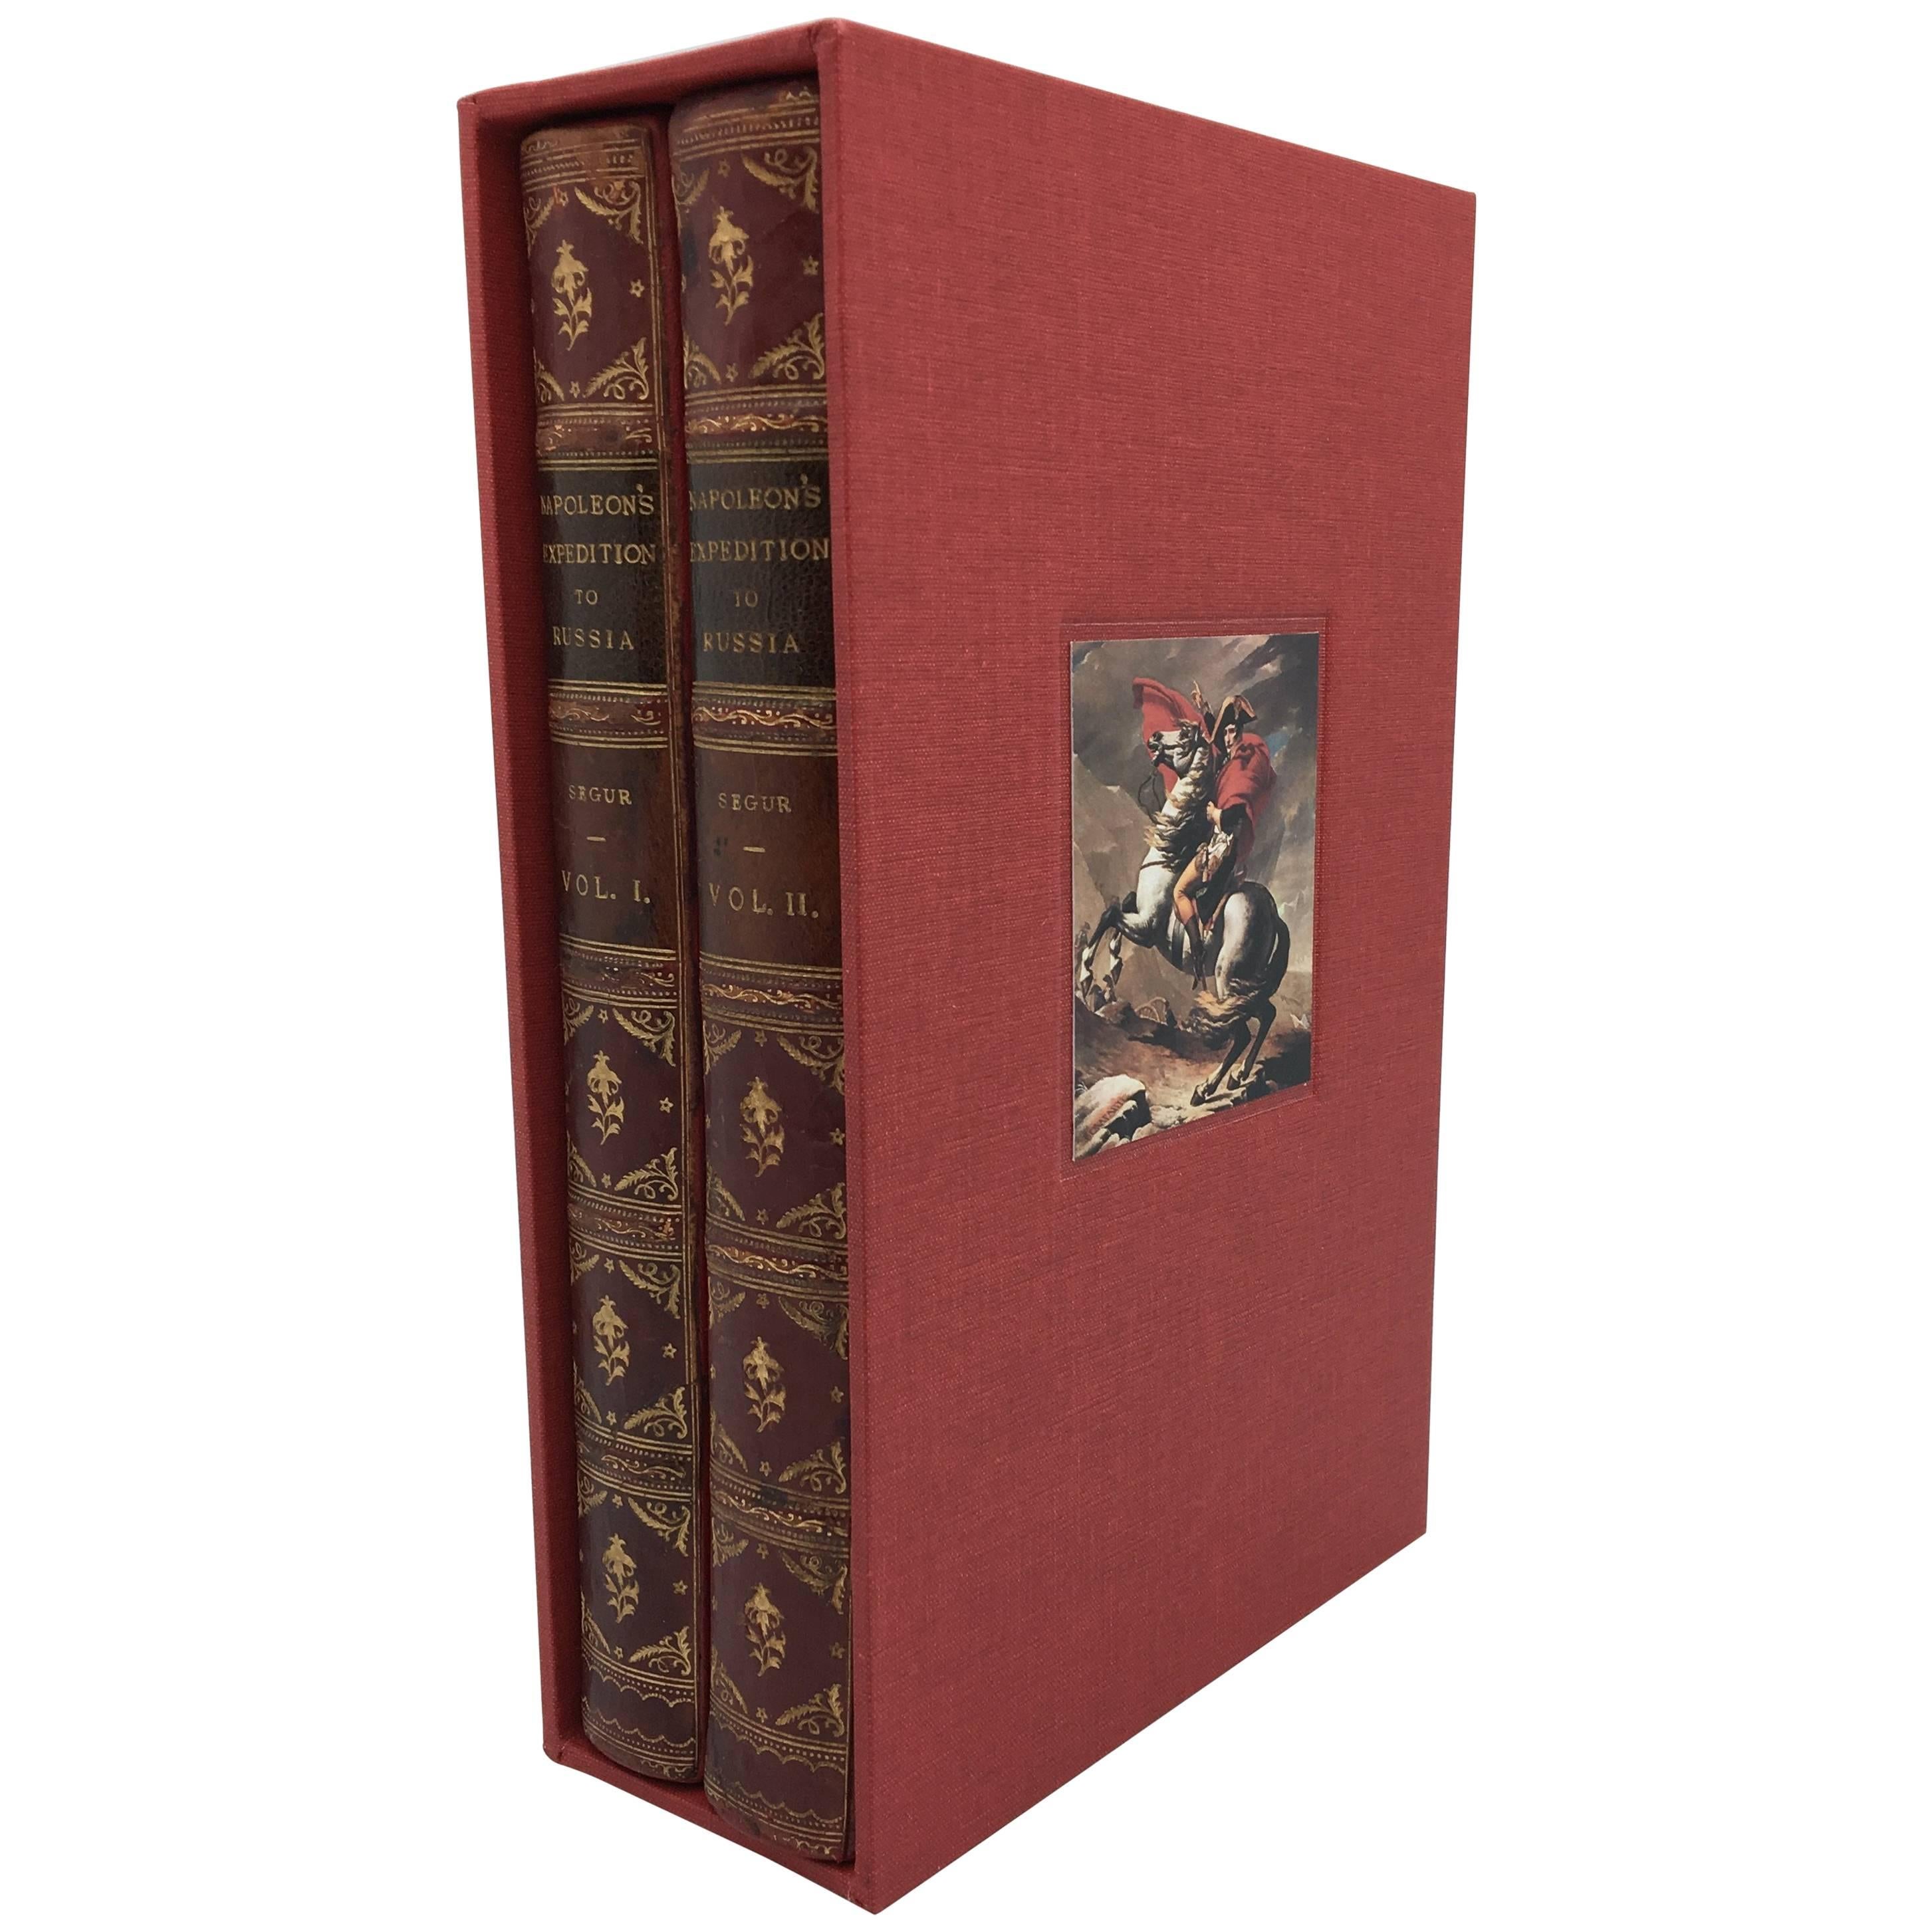 Napoleon's Expedition to Russia by Count De Segur, 2-Volumes, 1825